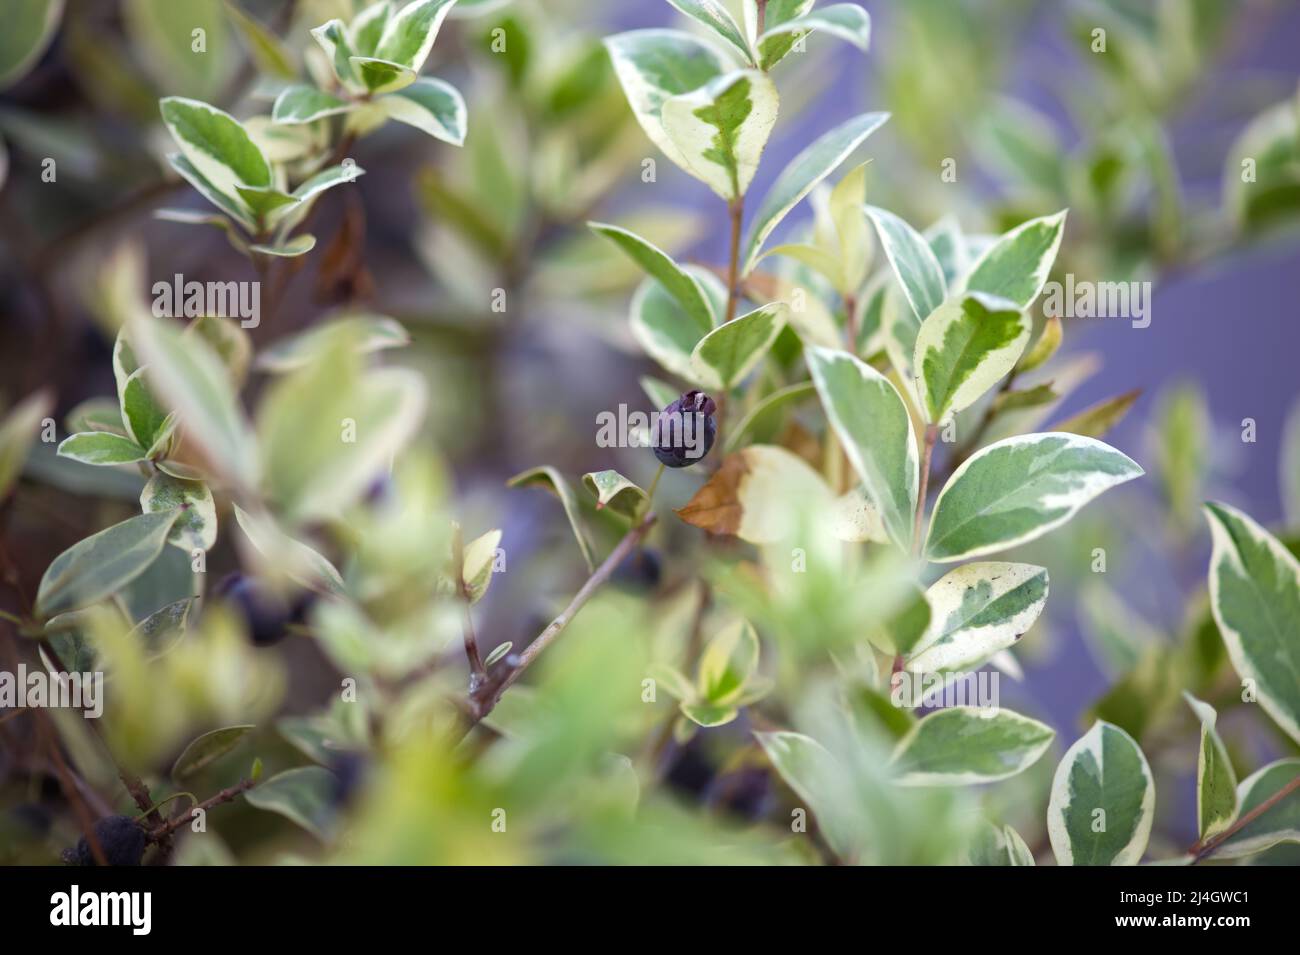 A Myrtus communis (Myrtle) plant with berries in nature. Close-up Stock Photo